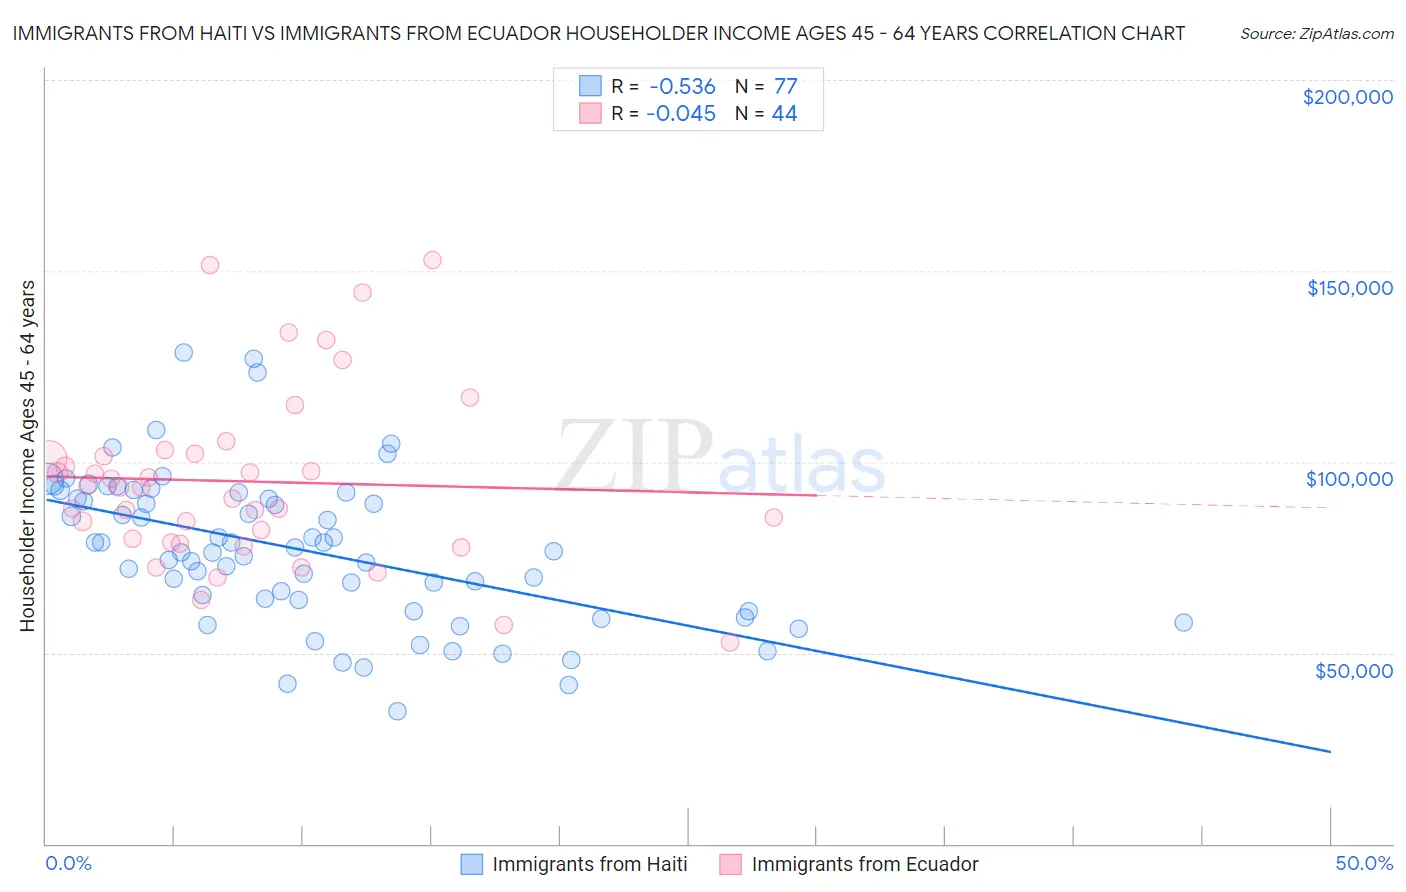 Immigrants from Haiti vs Immigrants from Ecuador Householder Income Ages 45 - 64 years